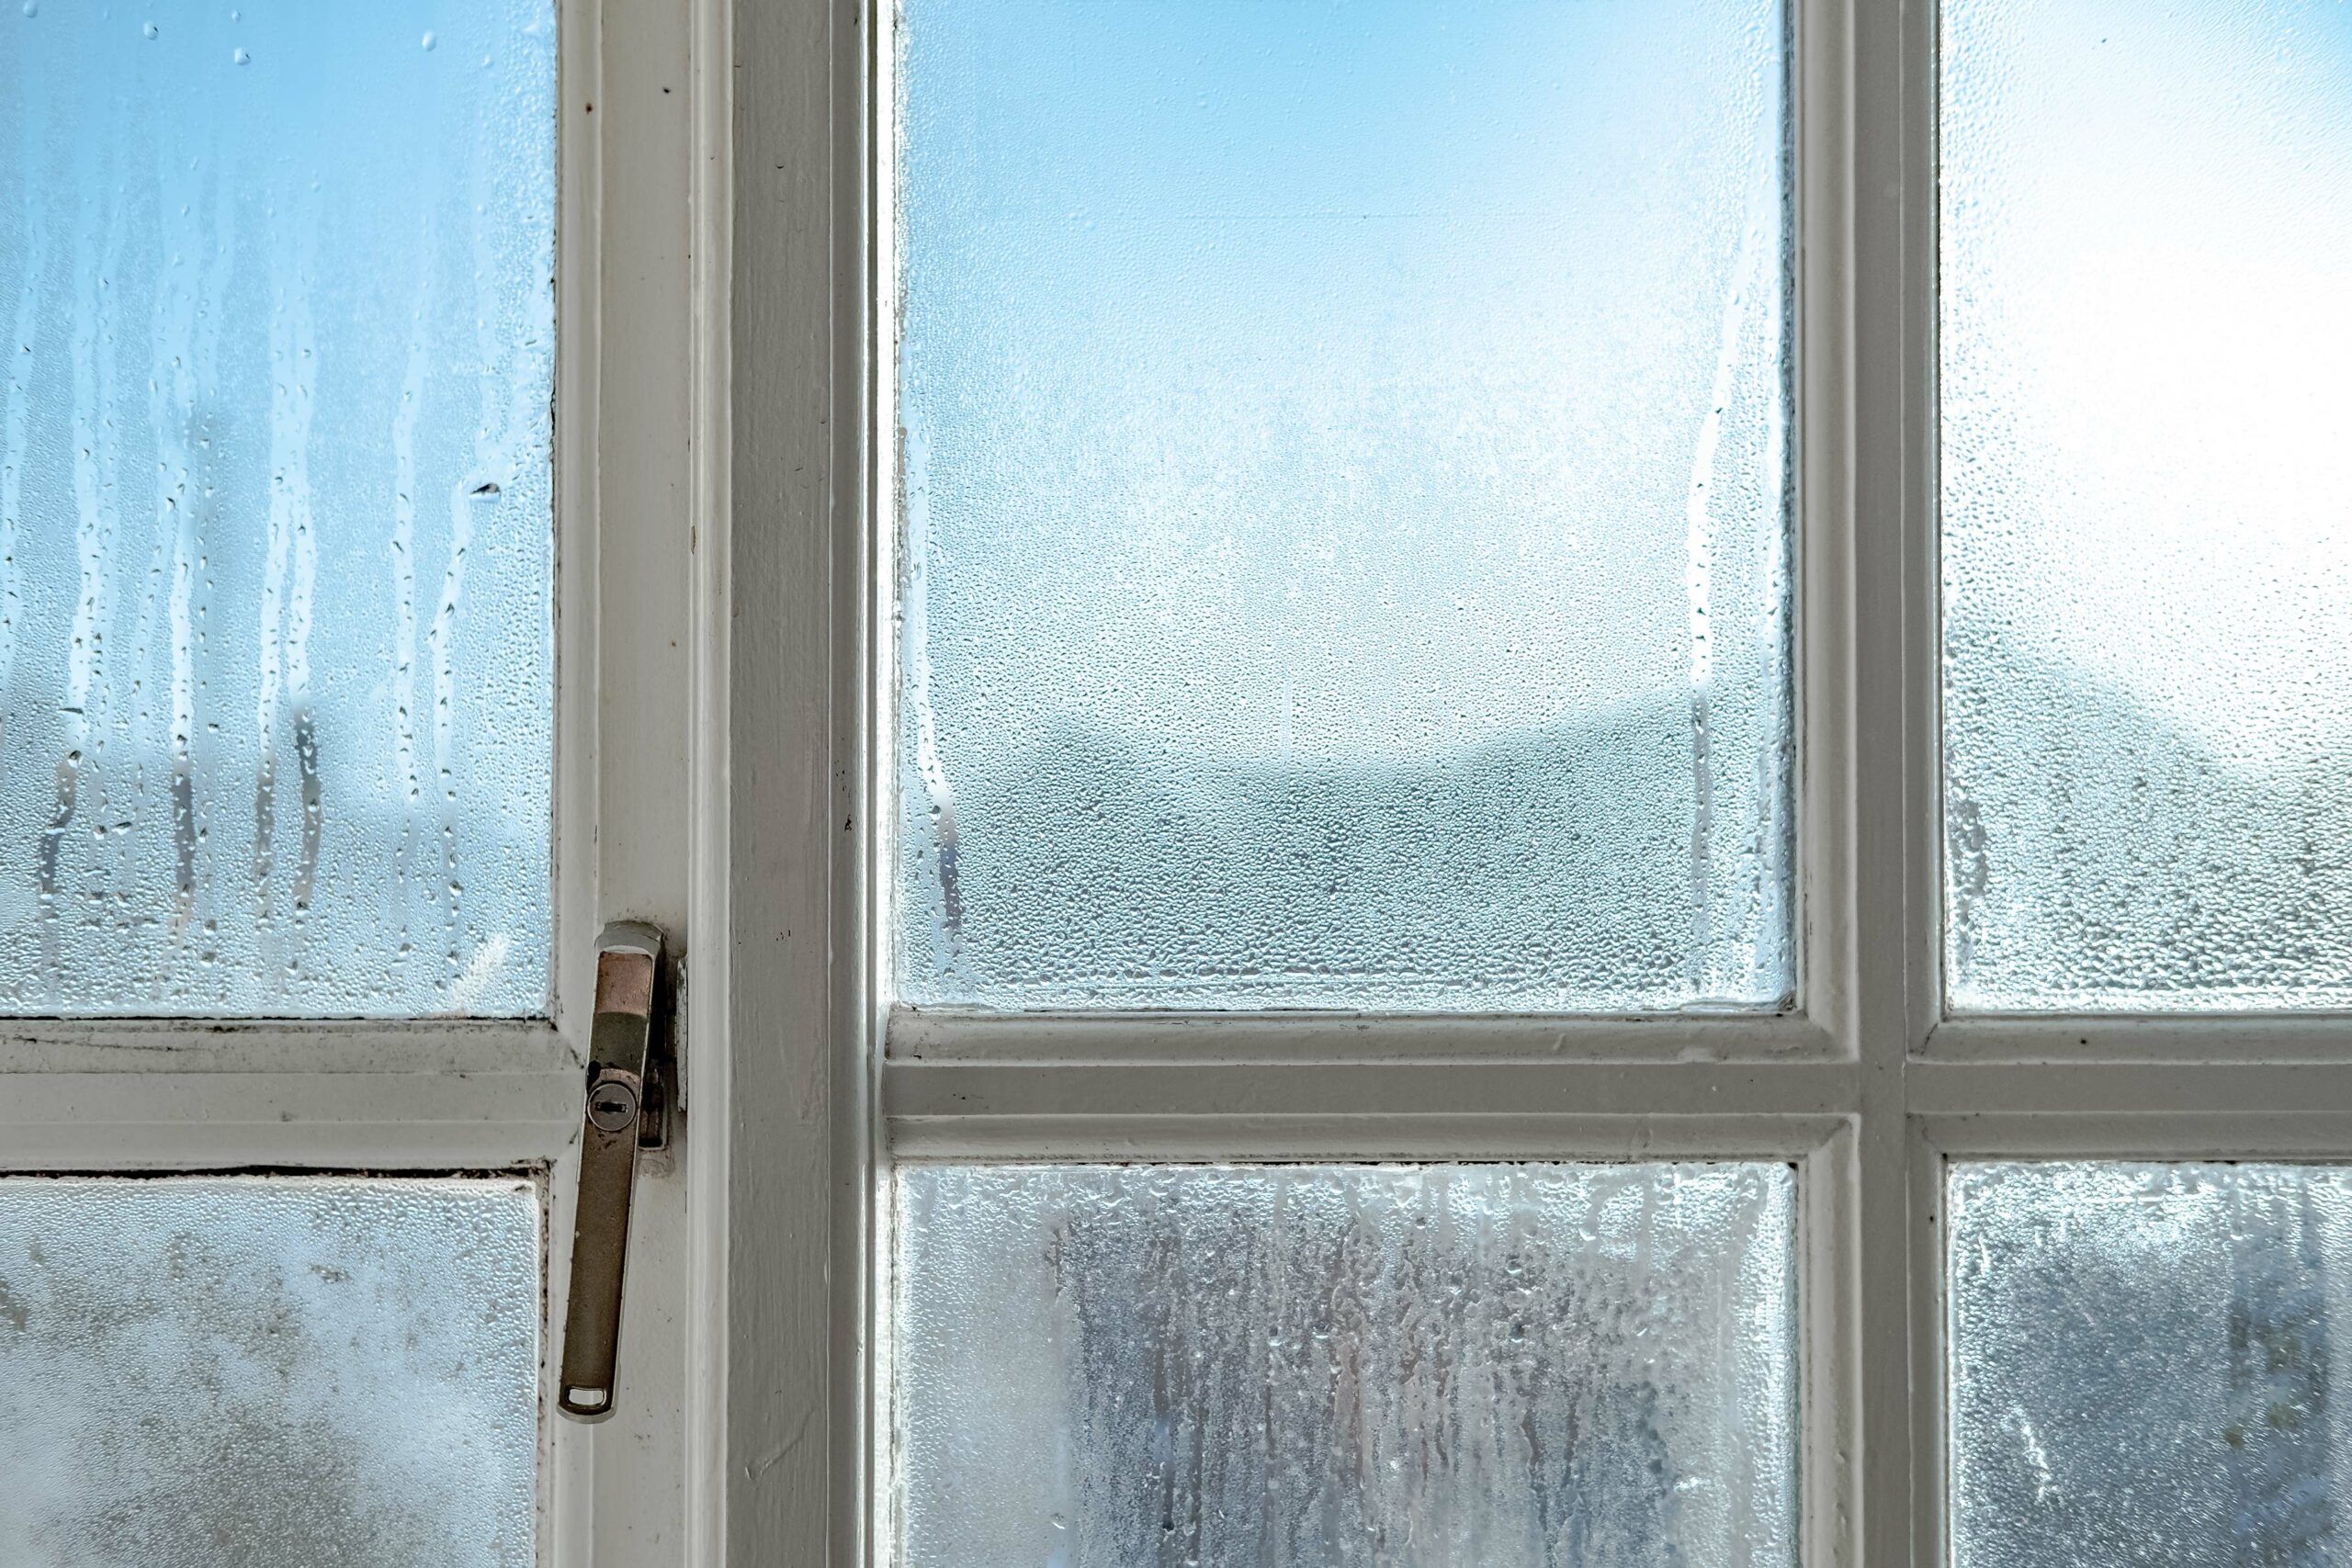 How To Stop Condensation On Windows In The Winter?